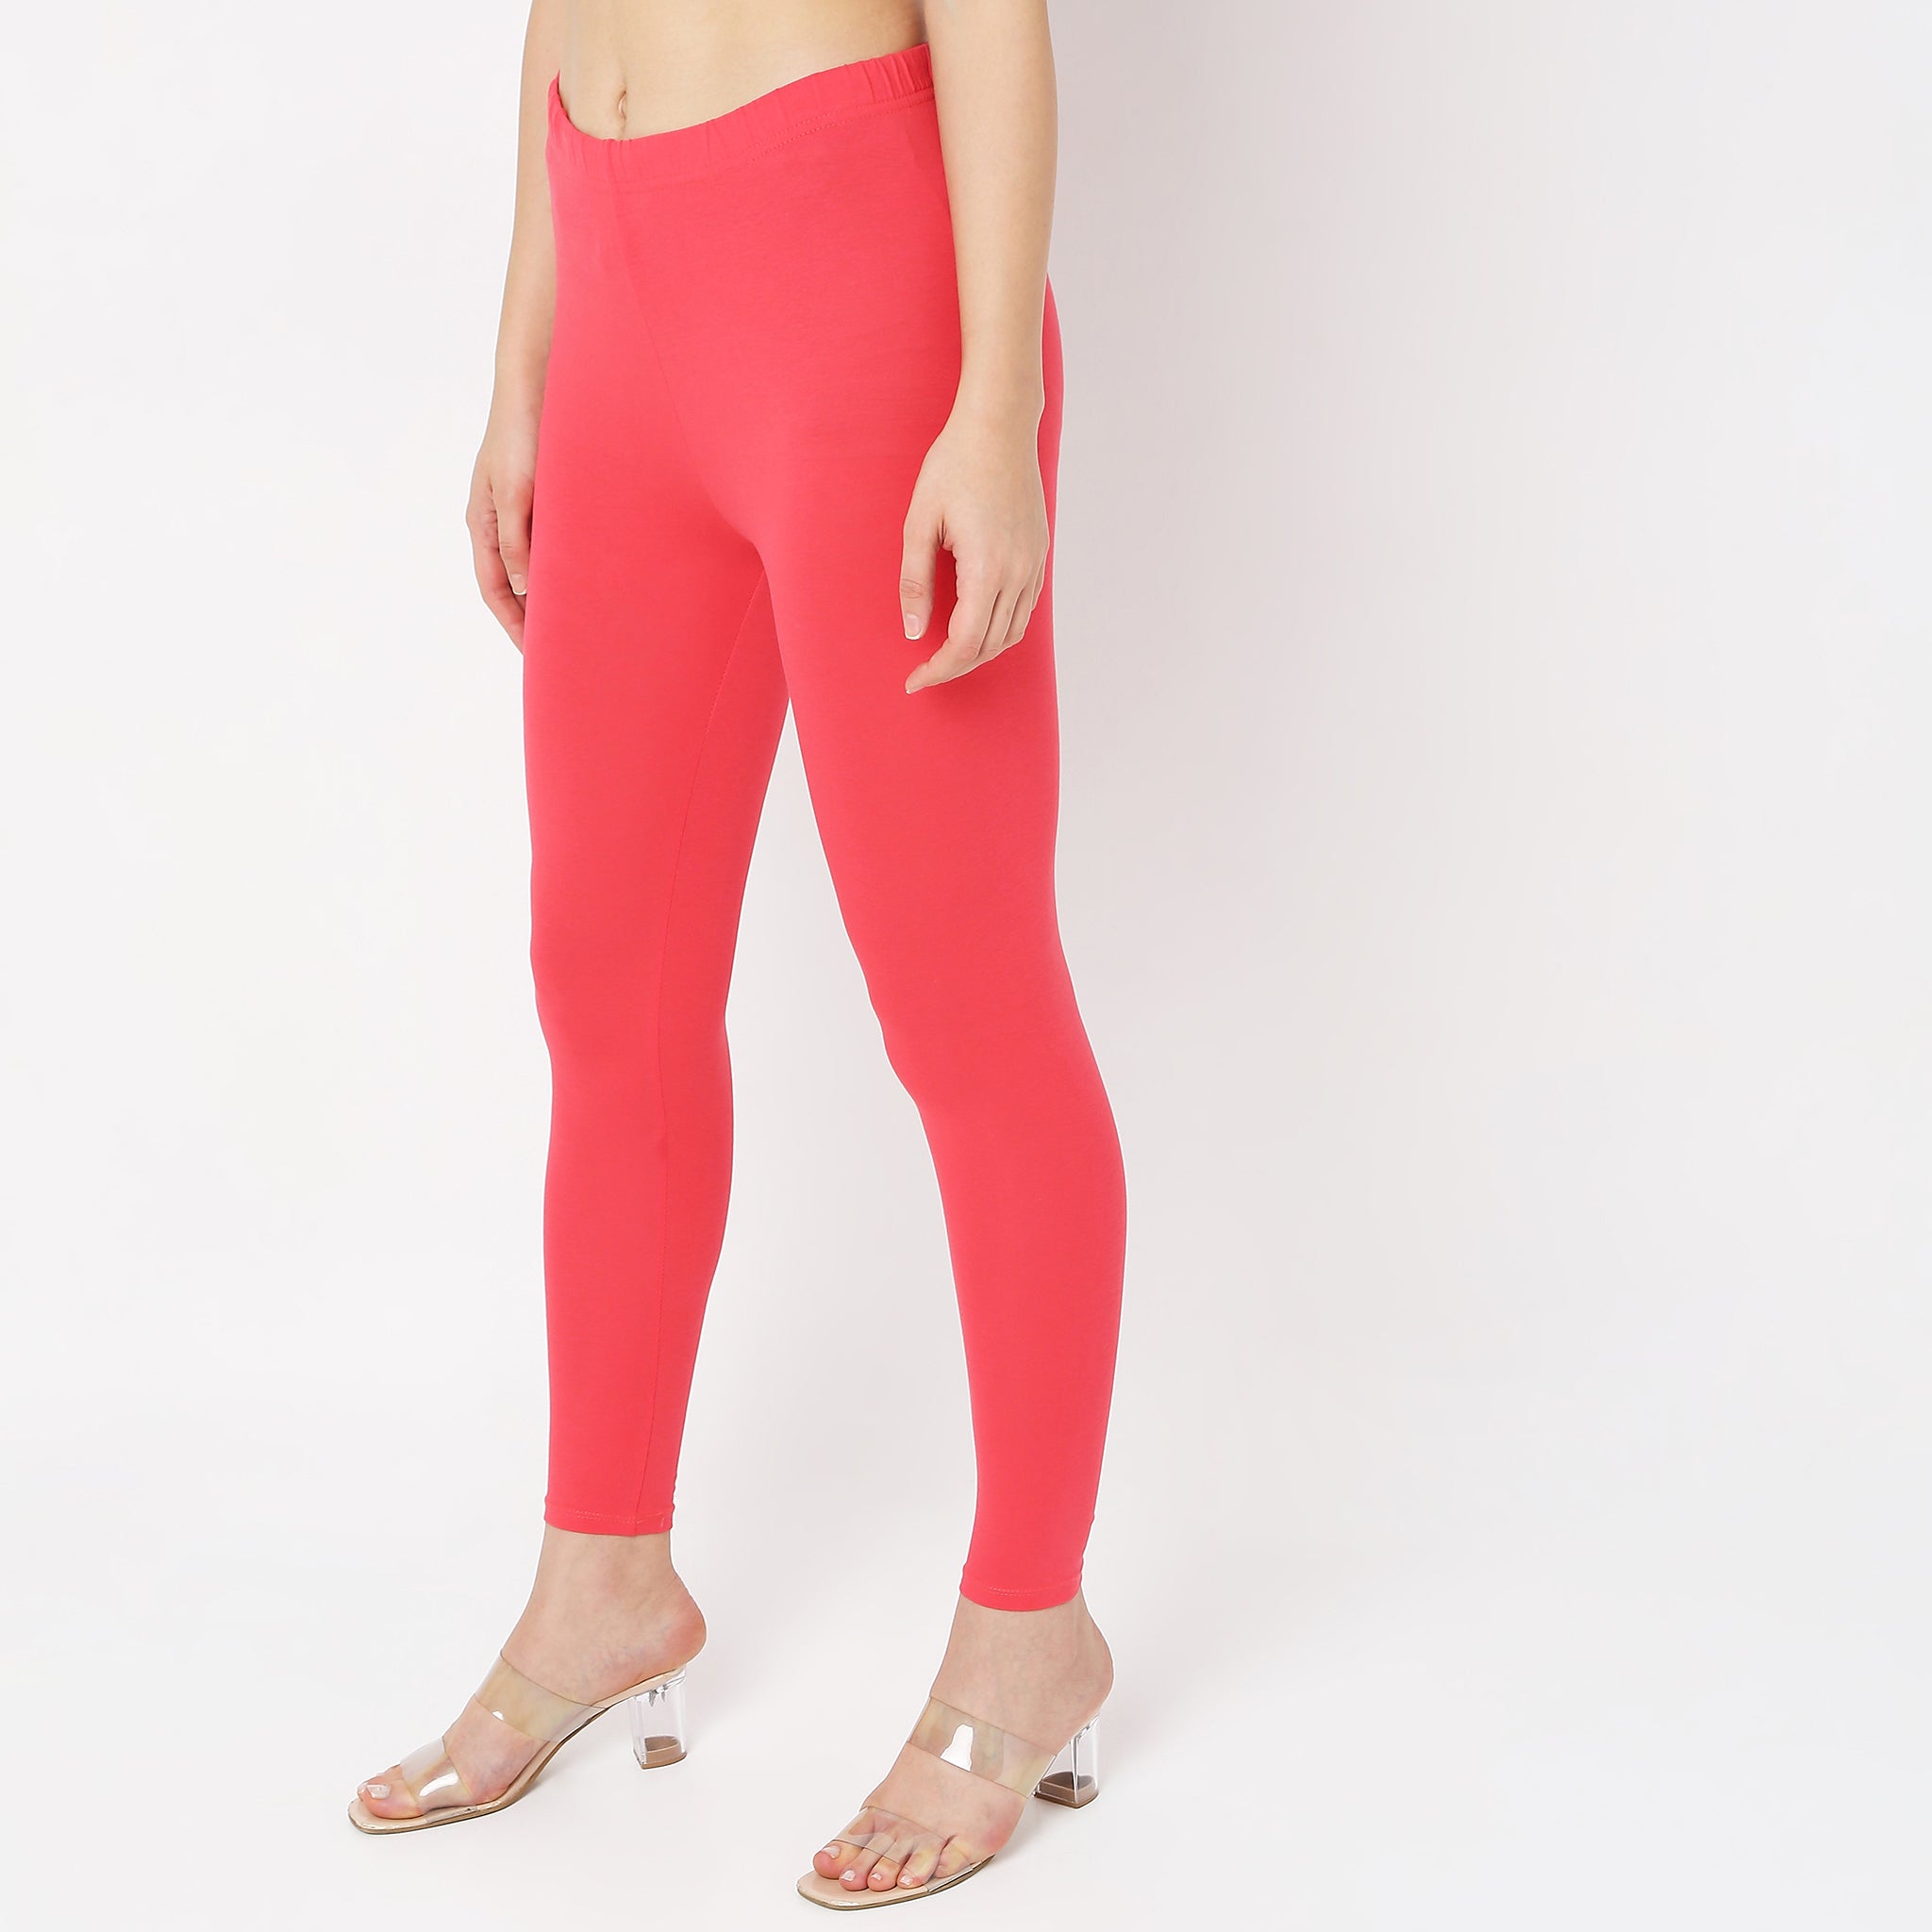 Red Mid Waist Women Ankle Length Leggings, Casual Wear, Skin Fit at Rs 450  in Tenali